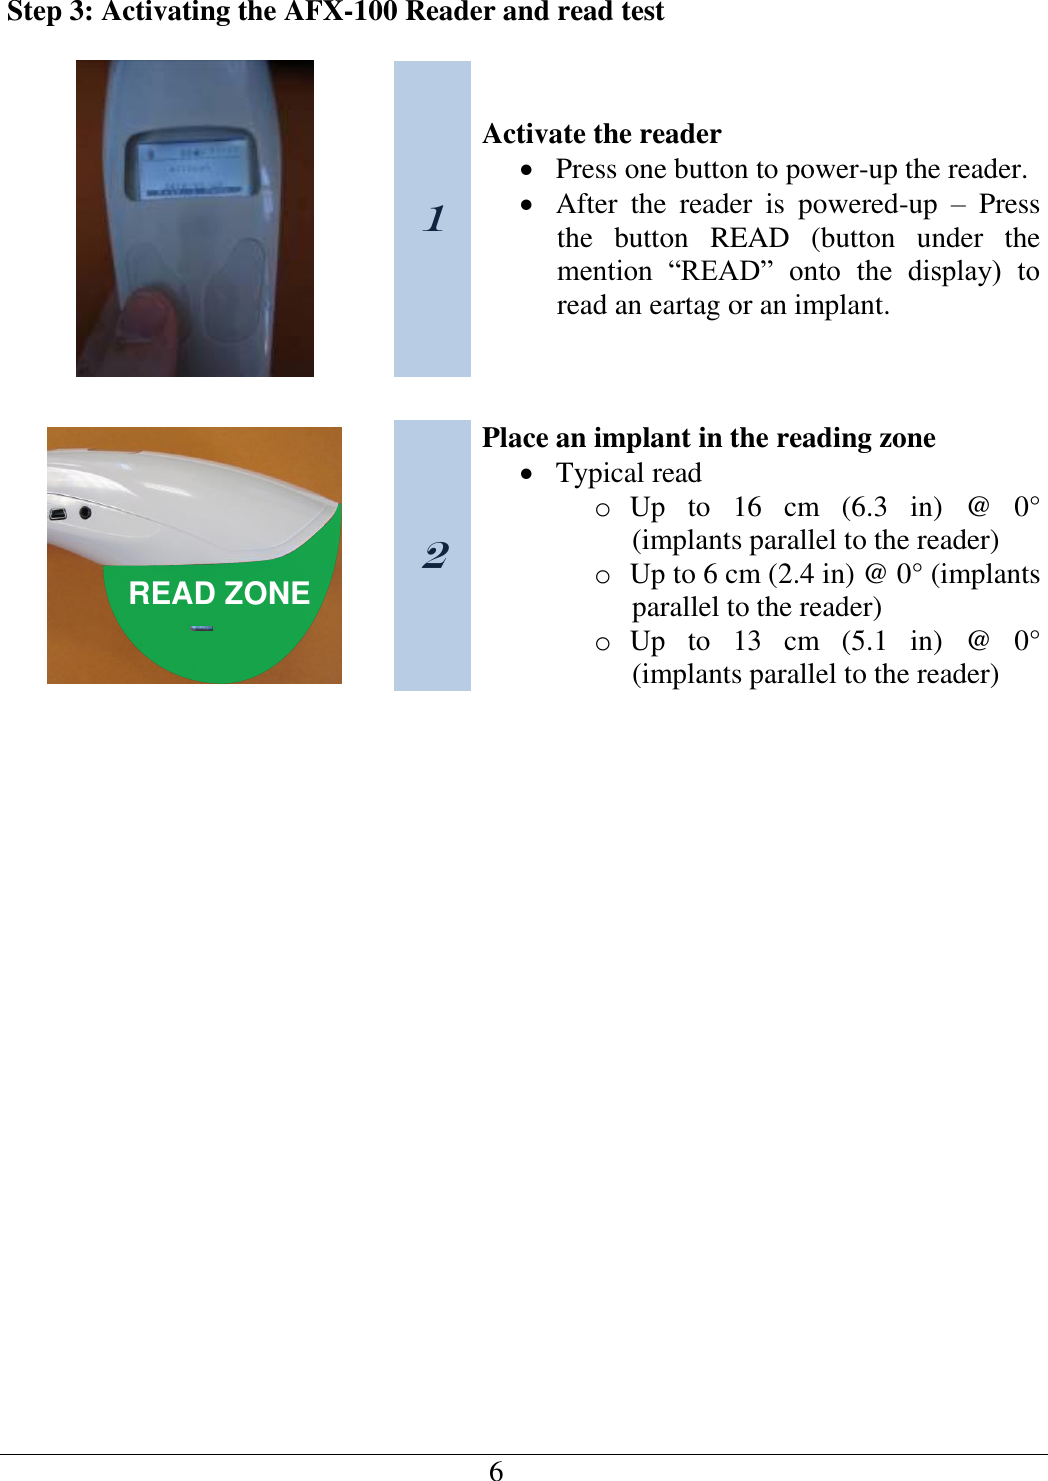   6   Step 3: Activating the AFX-100 Reader and read test   1 Activate the reader  Press one button to power-up the reader.  After  the  reader  is  powered-up  –  Press the  button  READ  (button  under  the mention  “READ”  onto  the  display)  to read an eartag or an implant.    READ ZONE 2 Place an implant in the reading zone  Typical read o Up  to  16  cm  (6.3  in)  @  0° (implants parallel to the reader) o Up to 6 cm (2.4 in) @ 0° (implants parallel to the reader) o Up  to  13  cm  (5.1  in)  @  0° (implants parallel to the reader)     